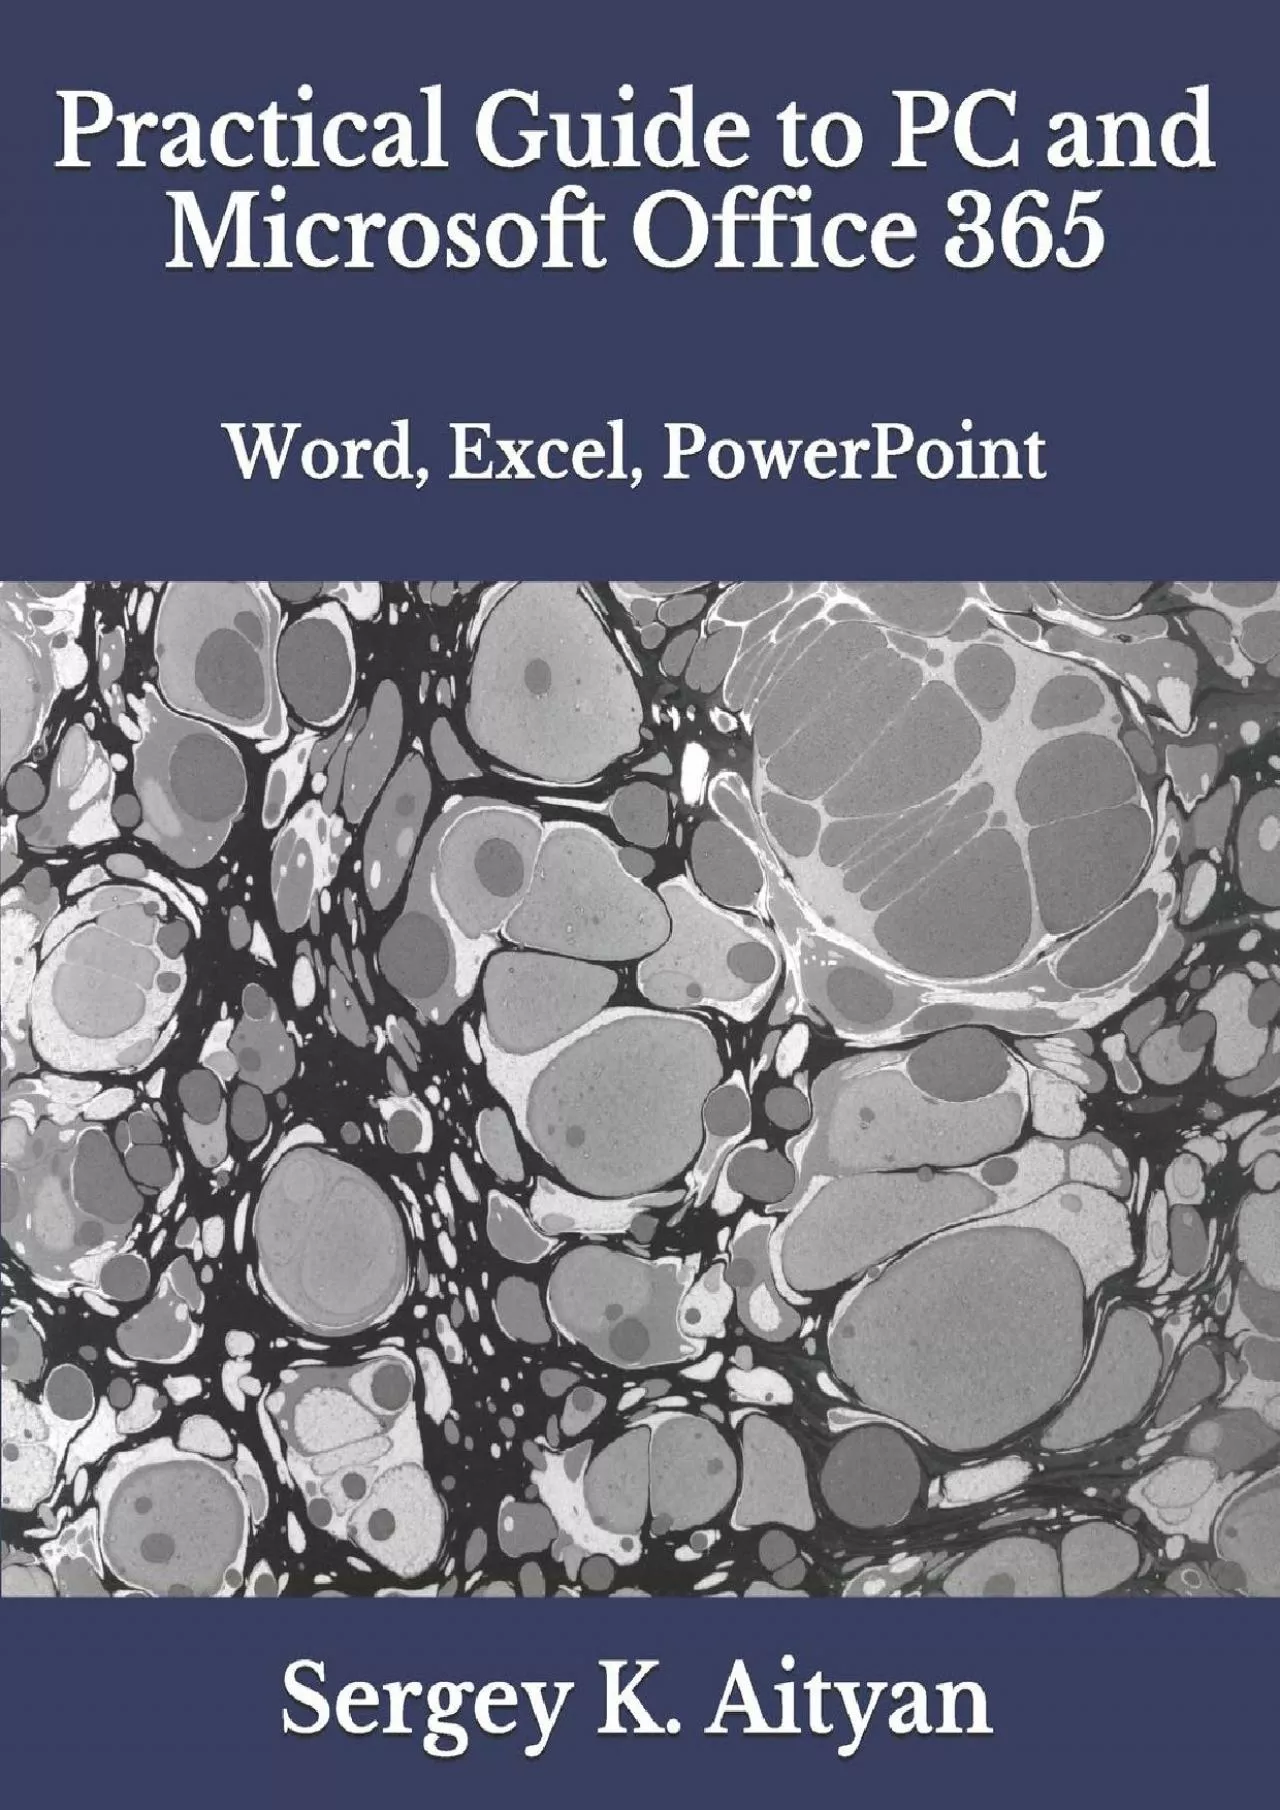 (BOOK)-Practical Guide to PC and Microsoft Office 365: Word, Excel, PowerPoint